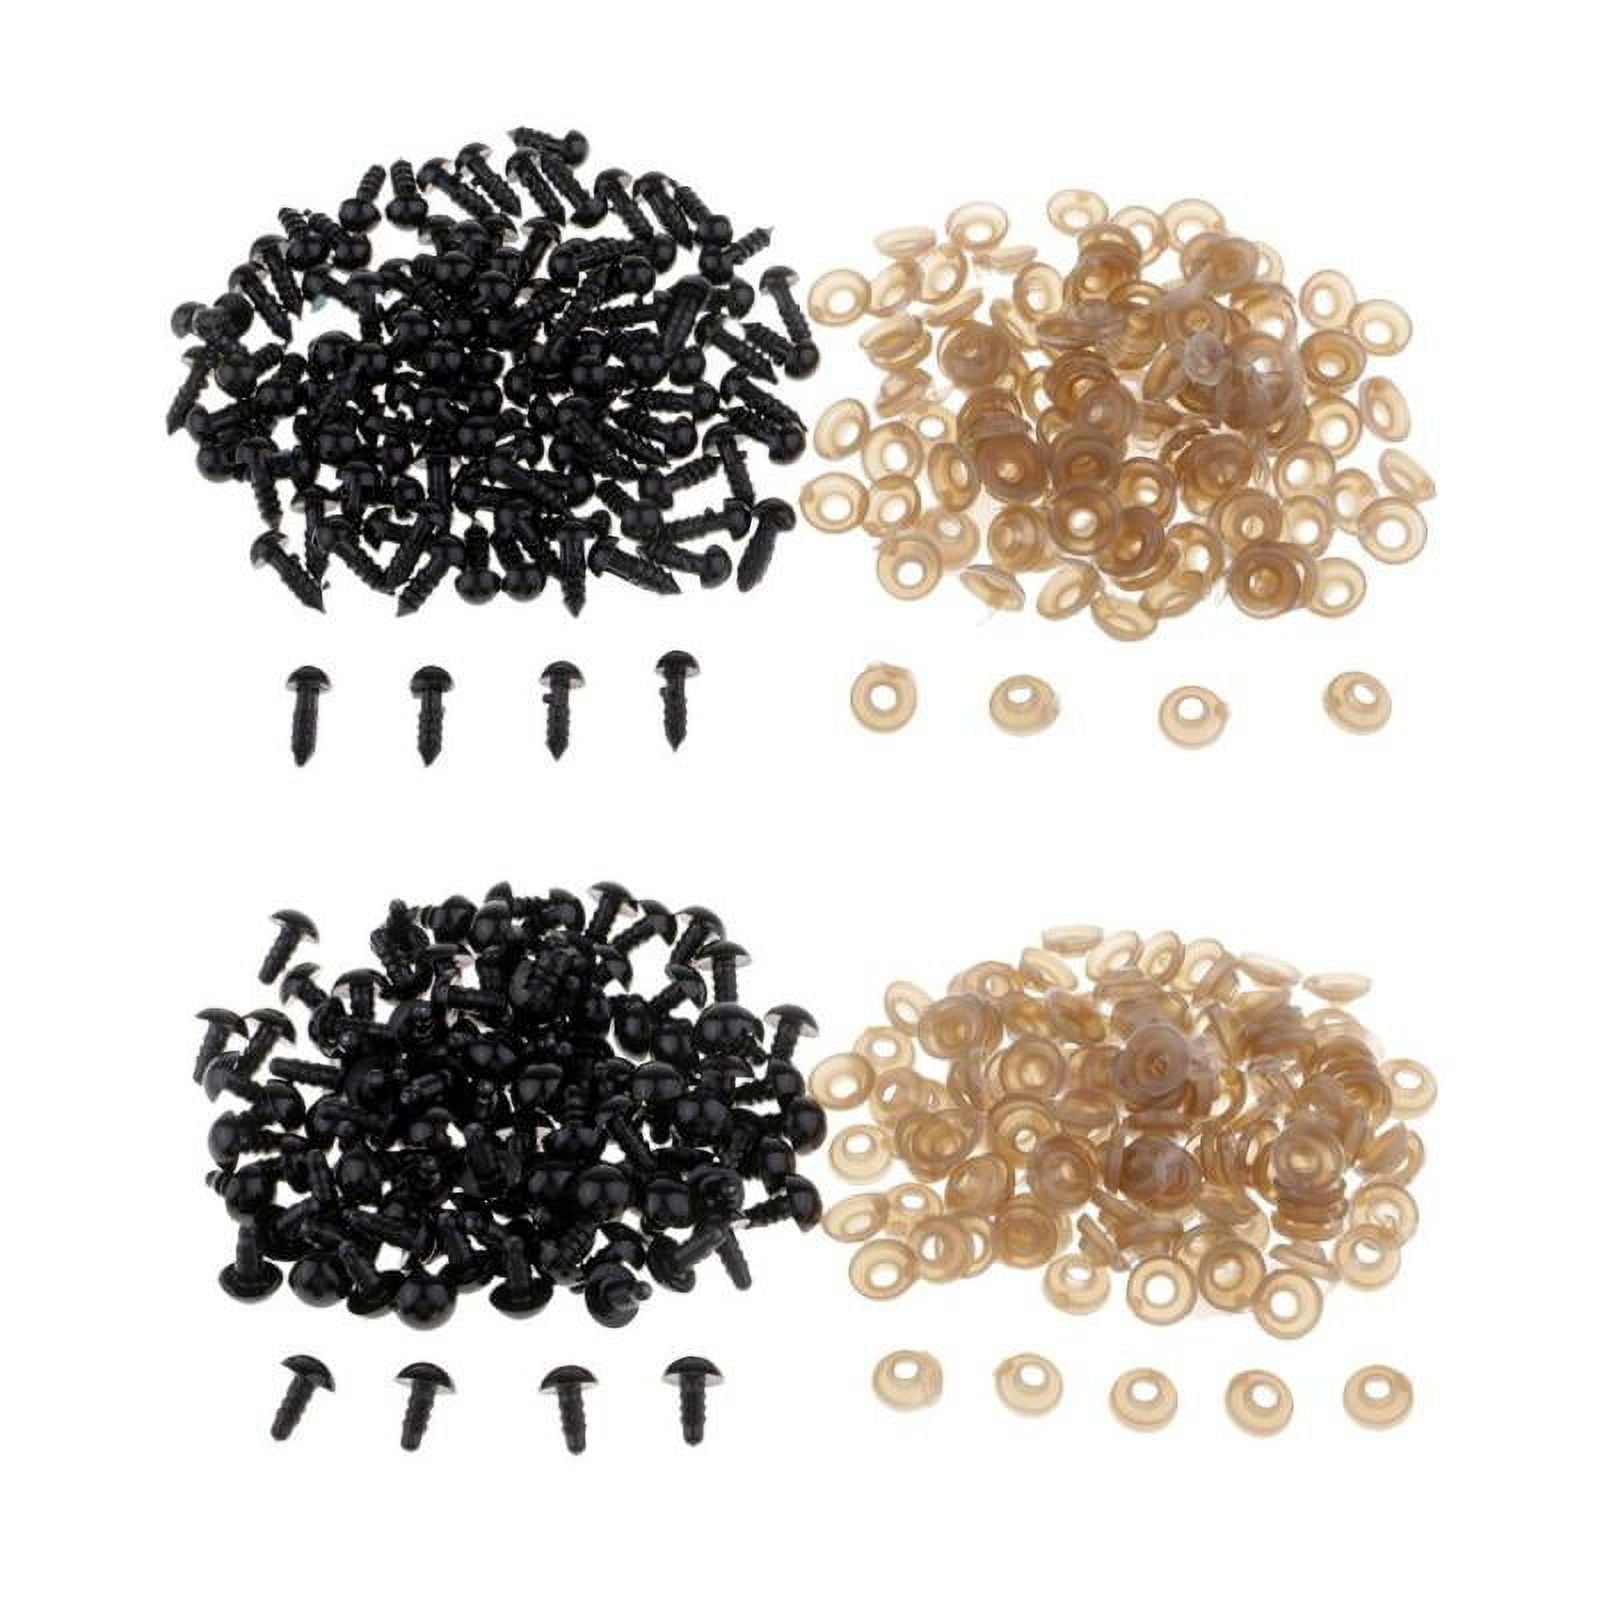 Walfront Plastic Round Safety Eyes, 100 Pieces Plastic Safety Eyes with  Washer For DIY Crafts Accessory, Felting Toys, Doll, Puppet, Plush Animal  Making and Teddy Bear 0.24/0.35/0.39/0.47 Inches (Black) 